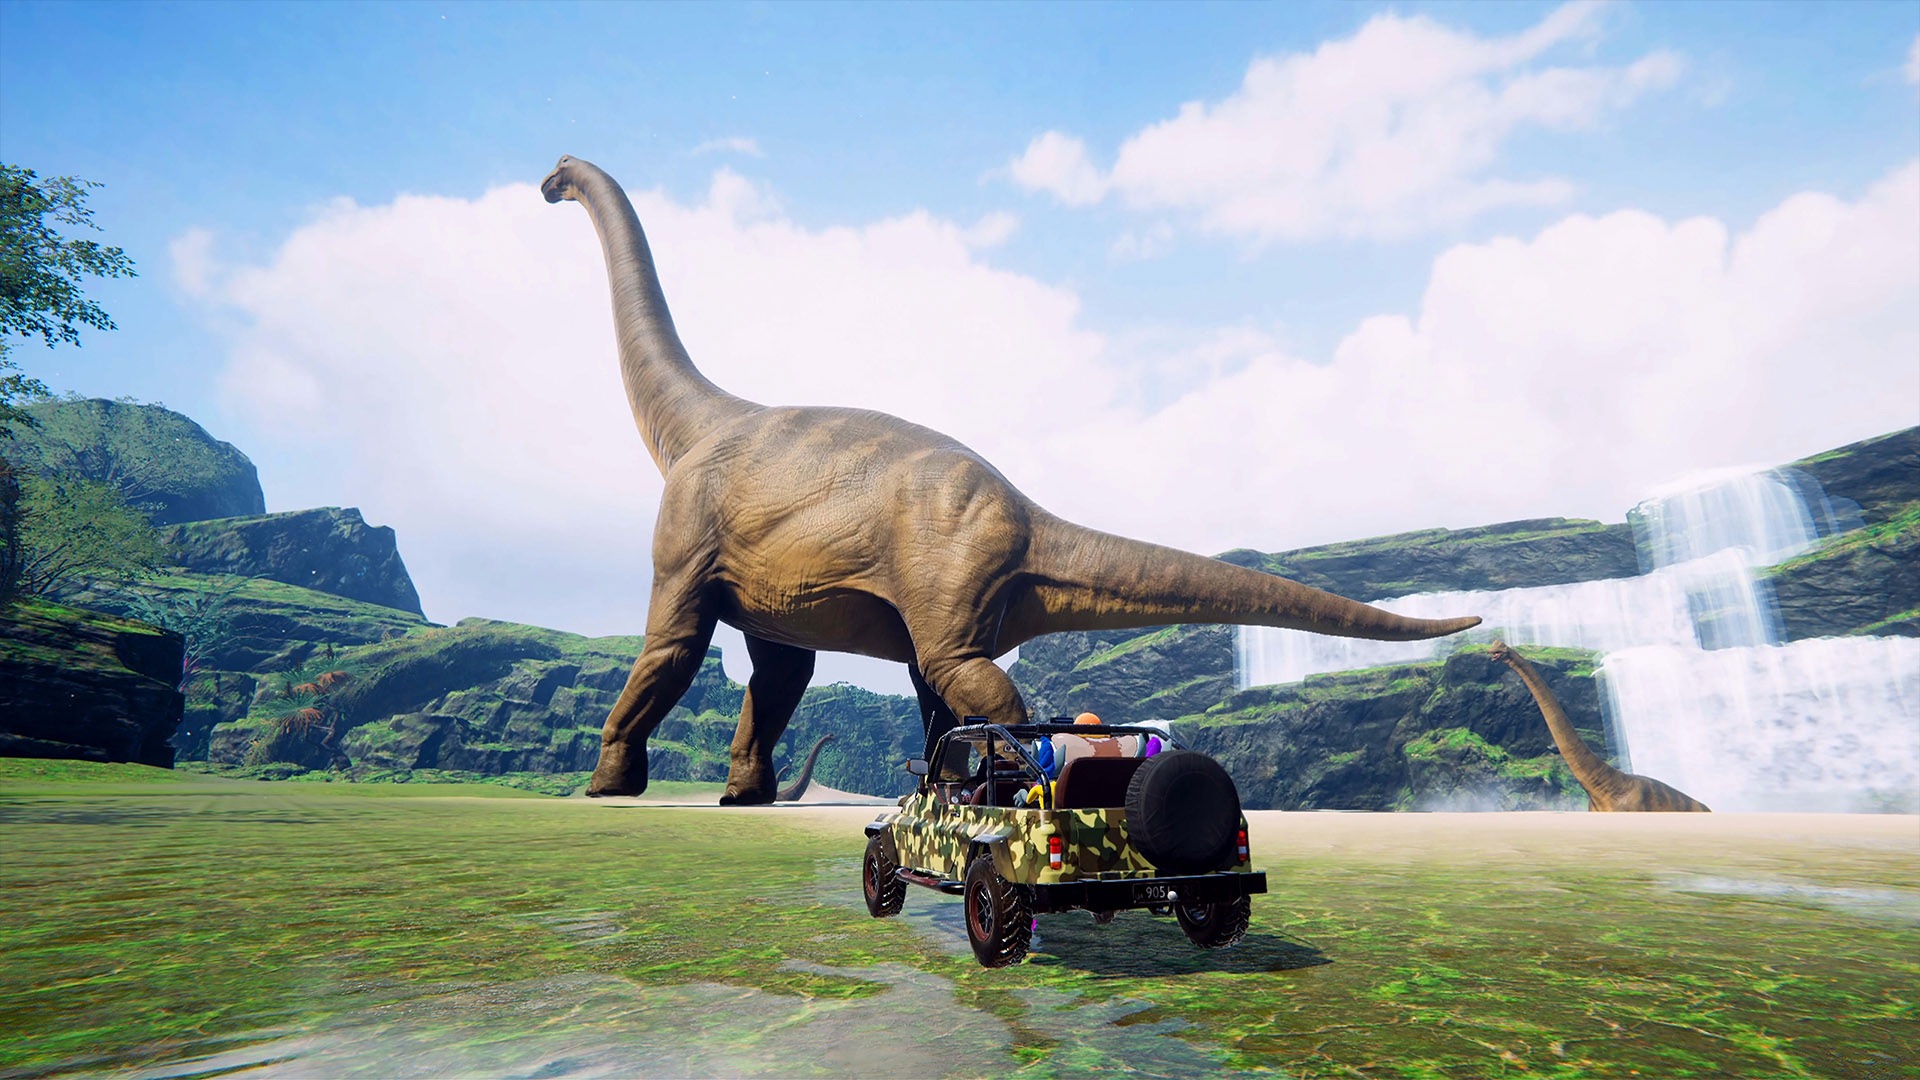 World of dinosaurs in virtual reality 